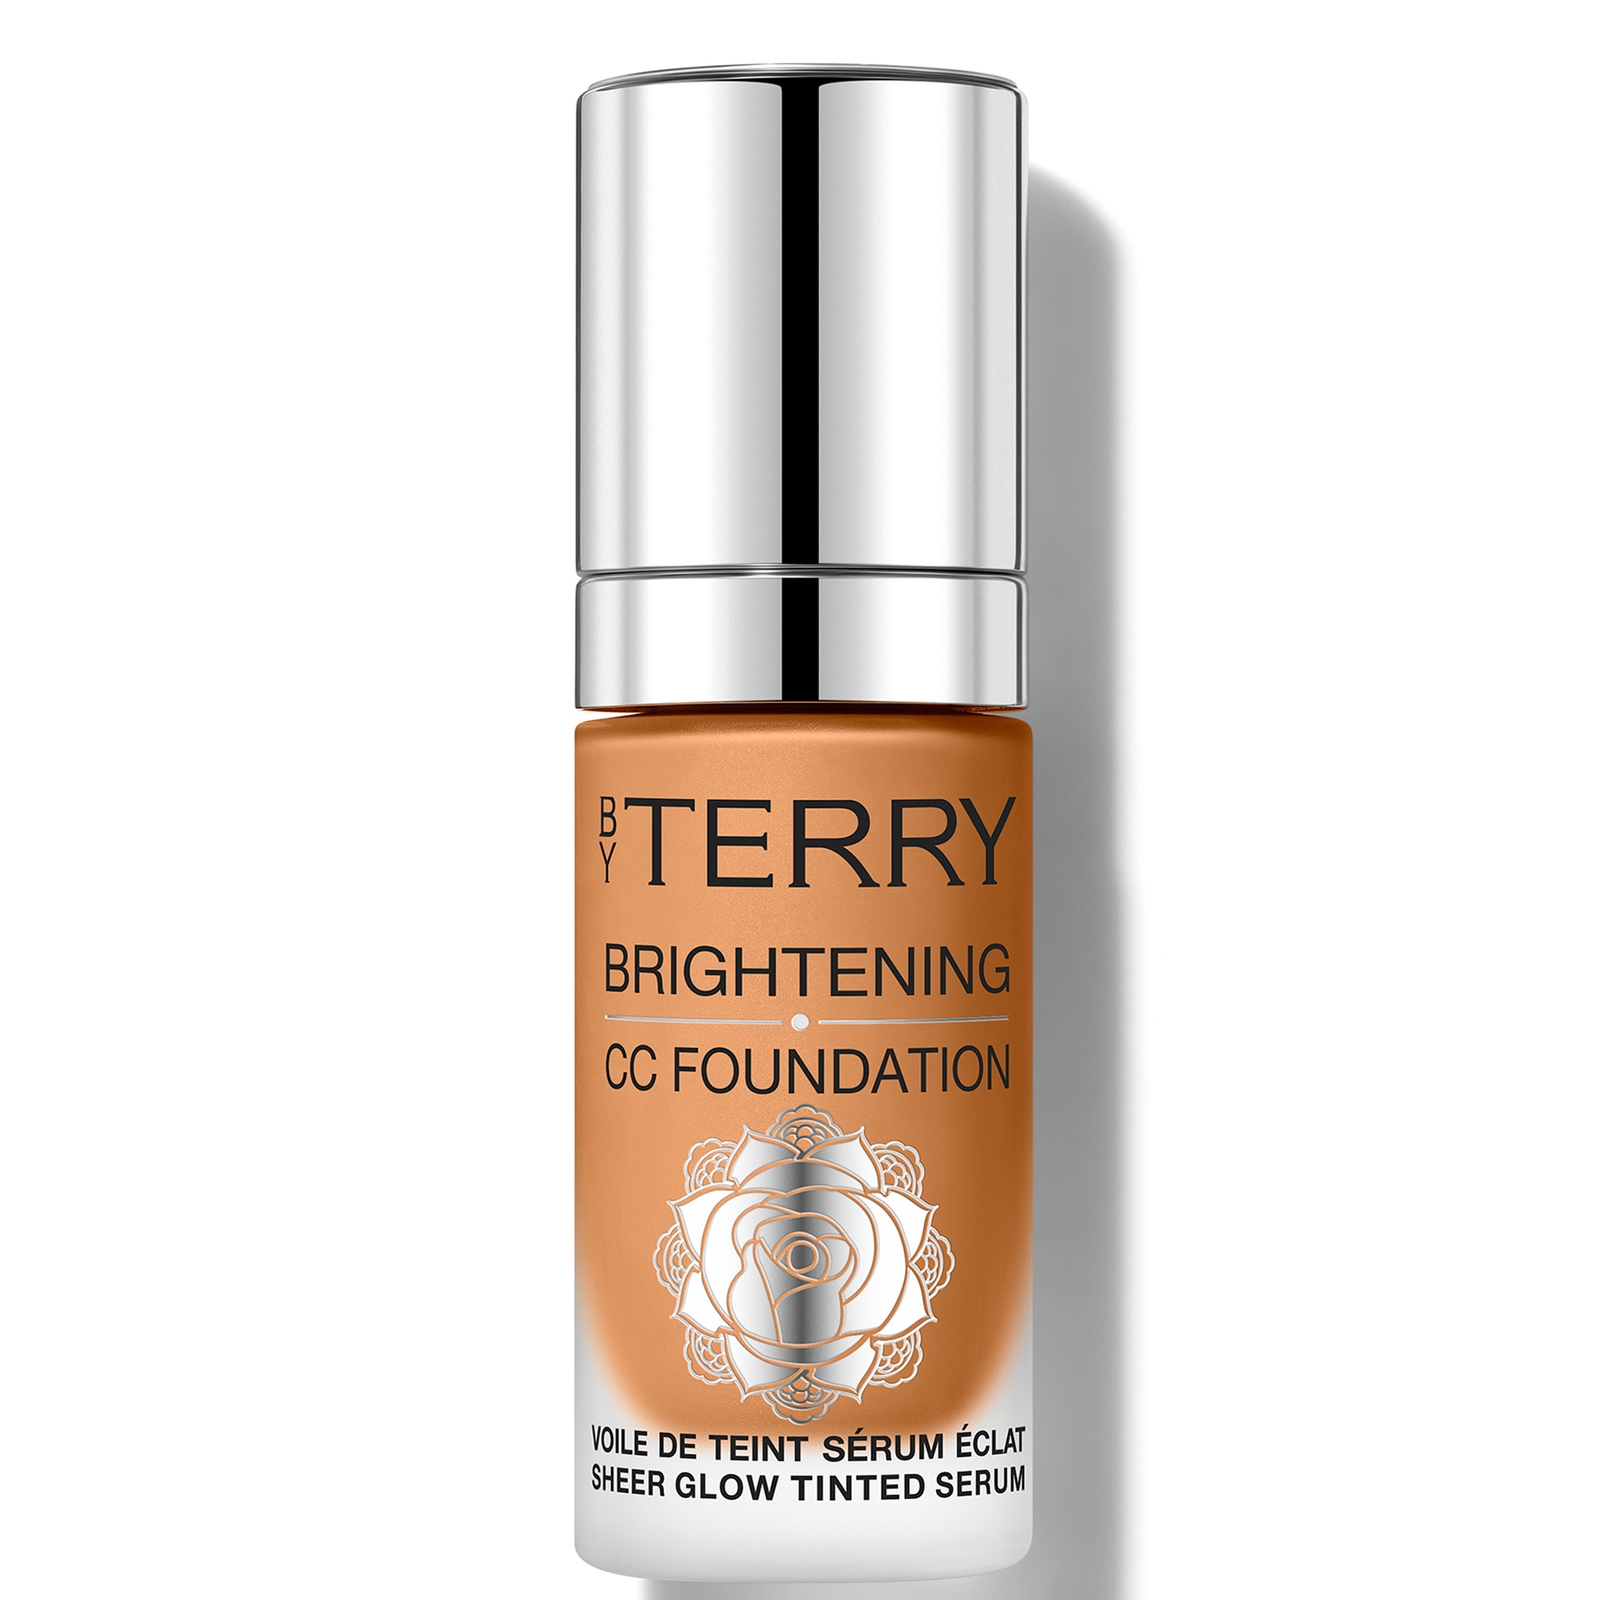 By Terry Brightening Cc Foundation 30ml (various Shades) - 6w In Brown